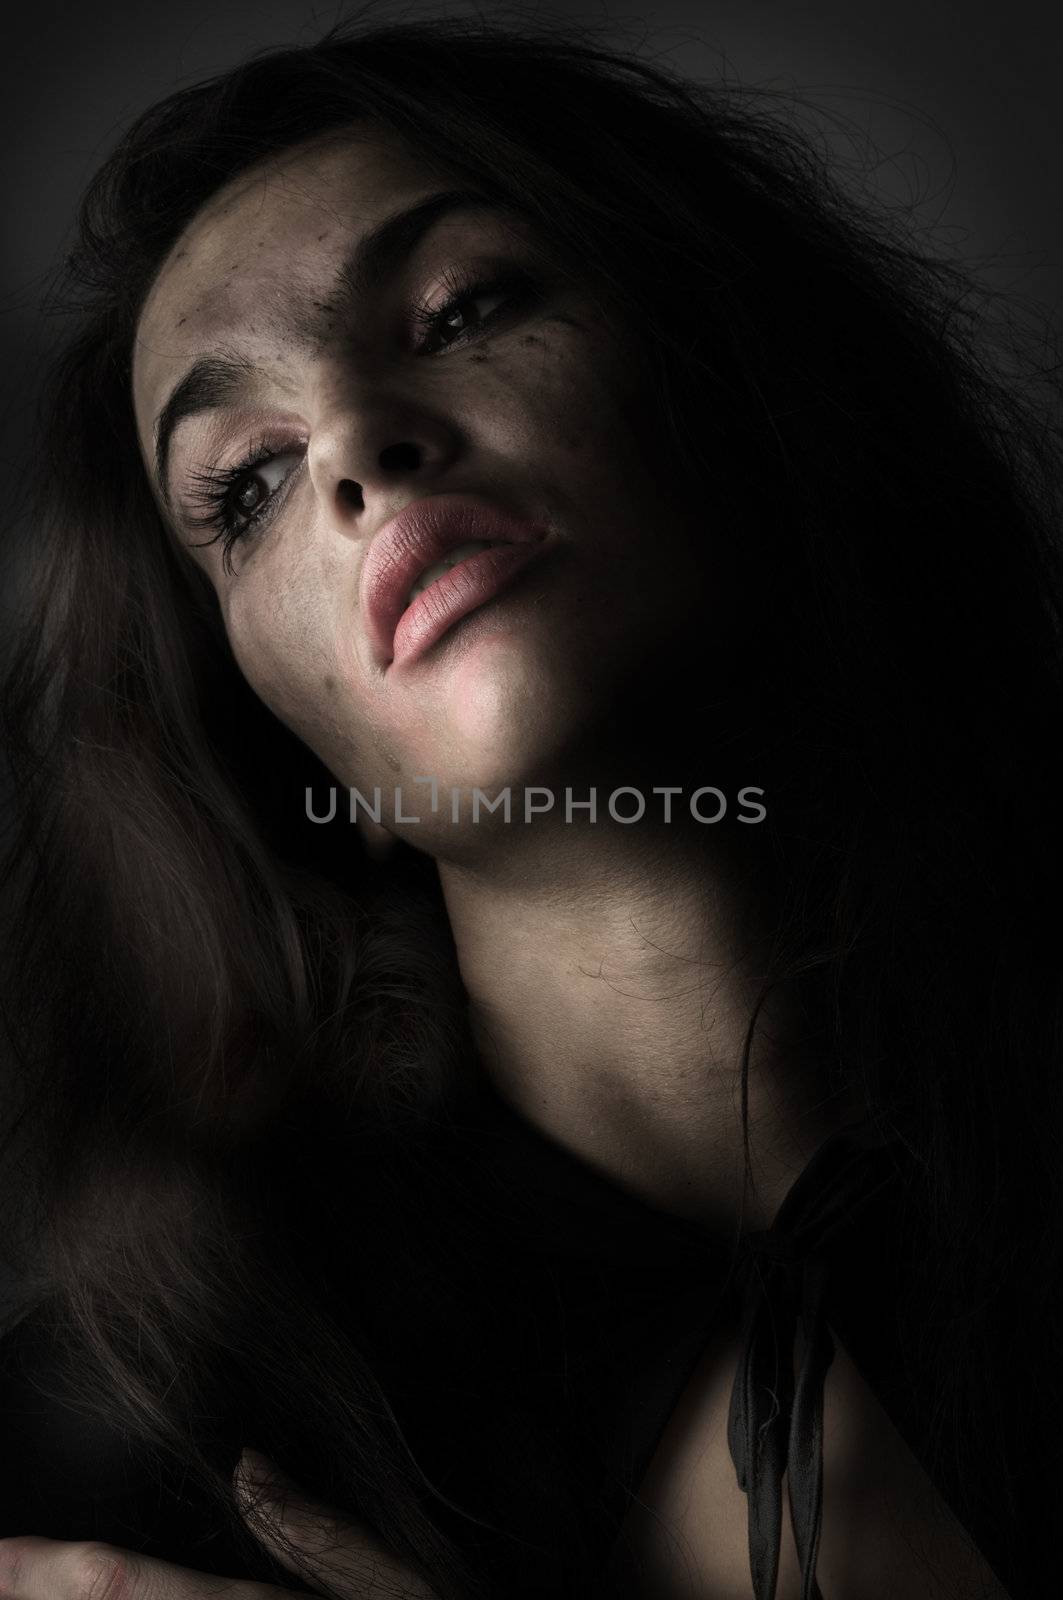 brunette in panic with broken make up in a desaturated portrait